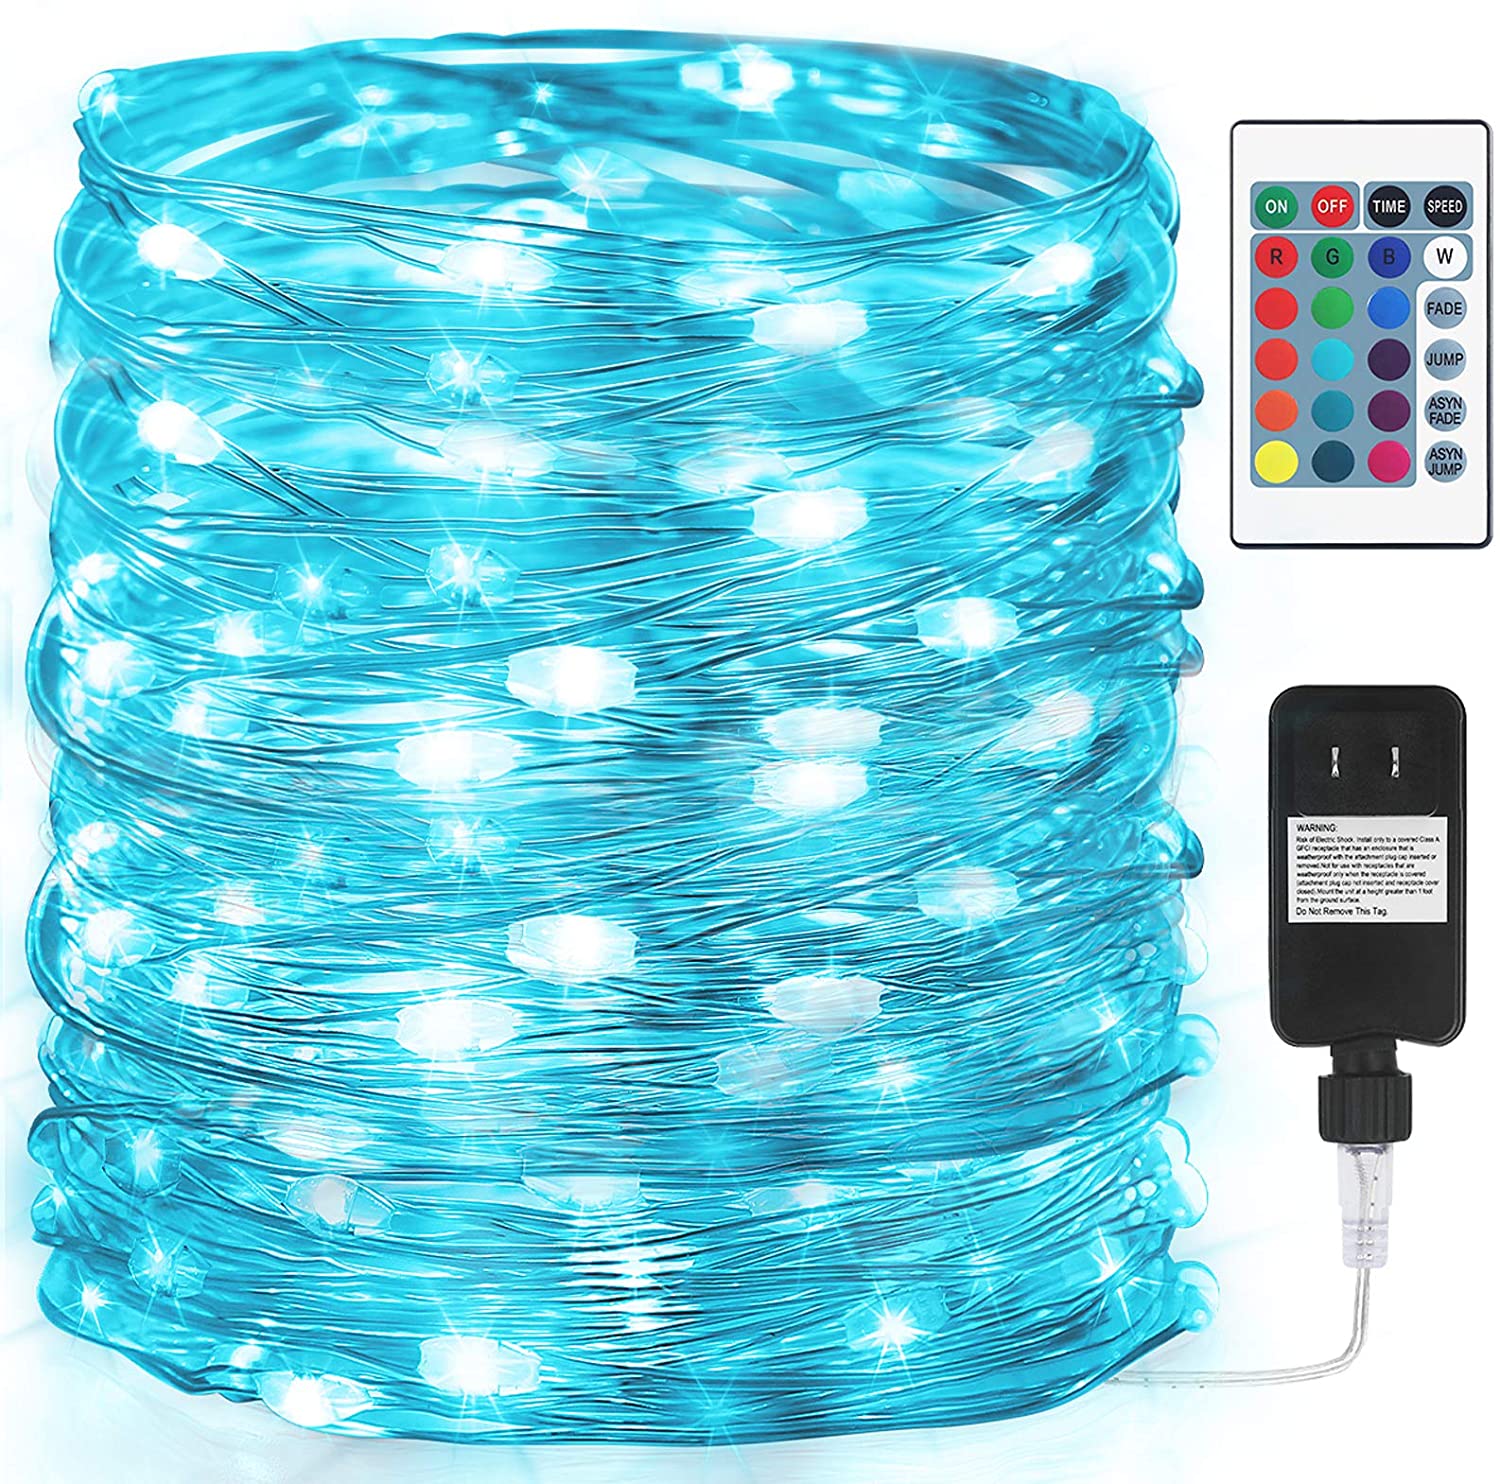 GDEALER Fairy Lights 66FT 200 LED Waterproof Color Changing String Lights with Remote 4 Lighting Modes Plug in Twinkle Lights for Bedroom Wedding Patio Craft Christmas Decor - 16 Colors